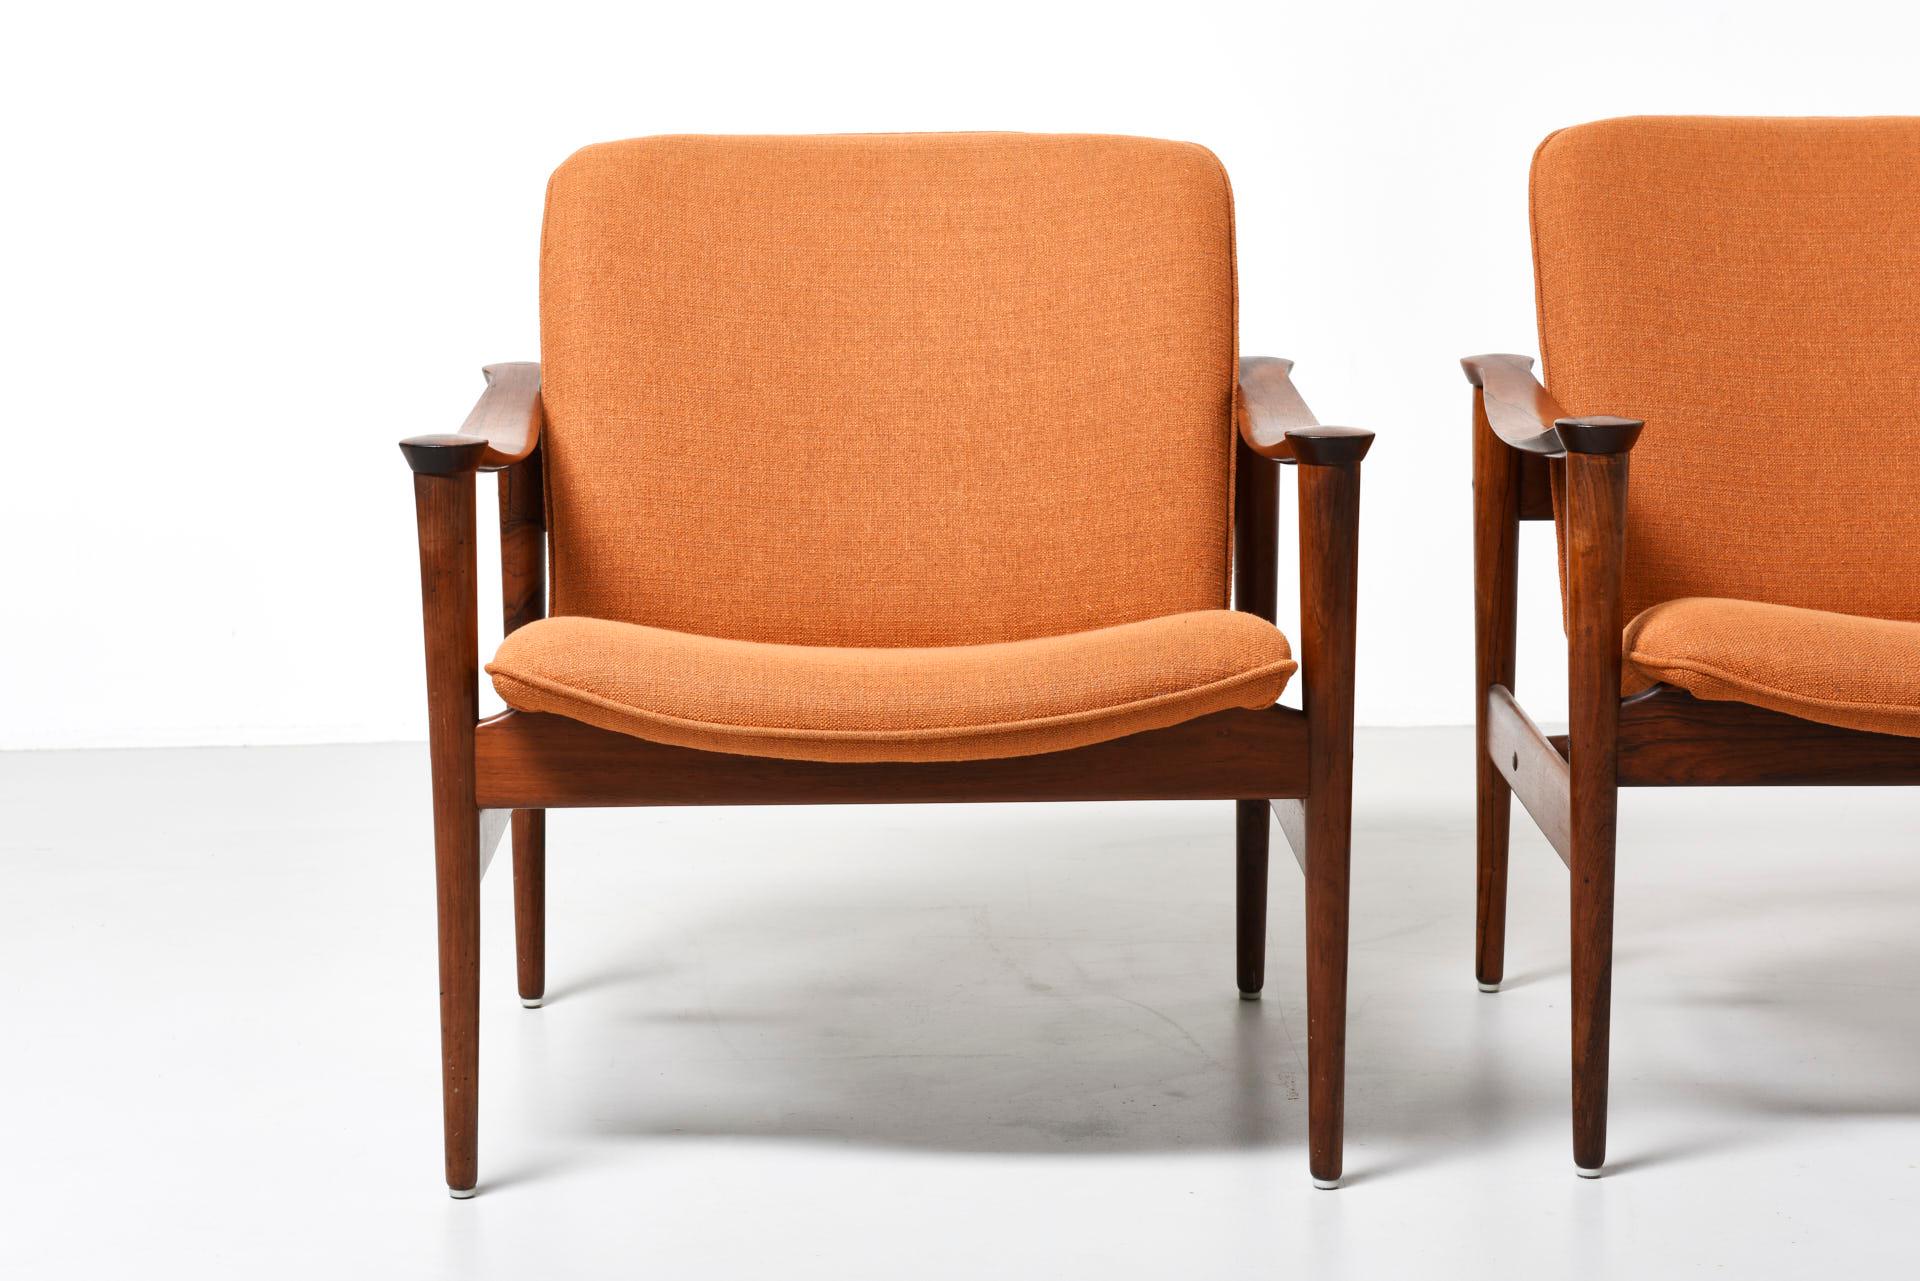 These model 711 armchairs were designed by Fredrik A. Kayser for Vatne Lenestolfabrik in Norway, circa 1958. The chairs feature Brazilian rosewood frames, brass fittings, and light orange fabric upholstery.